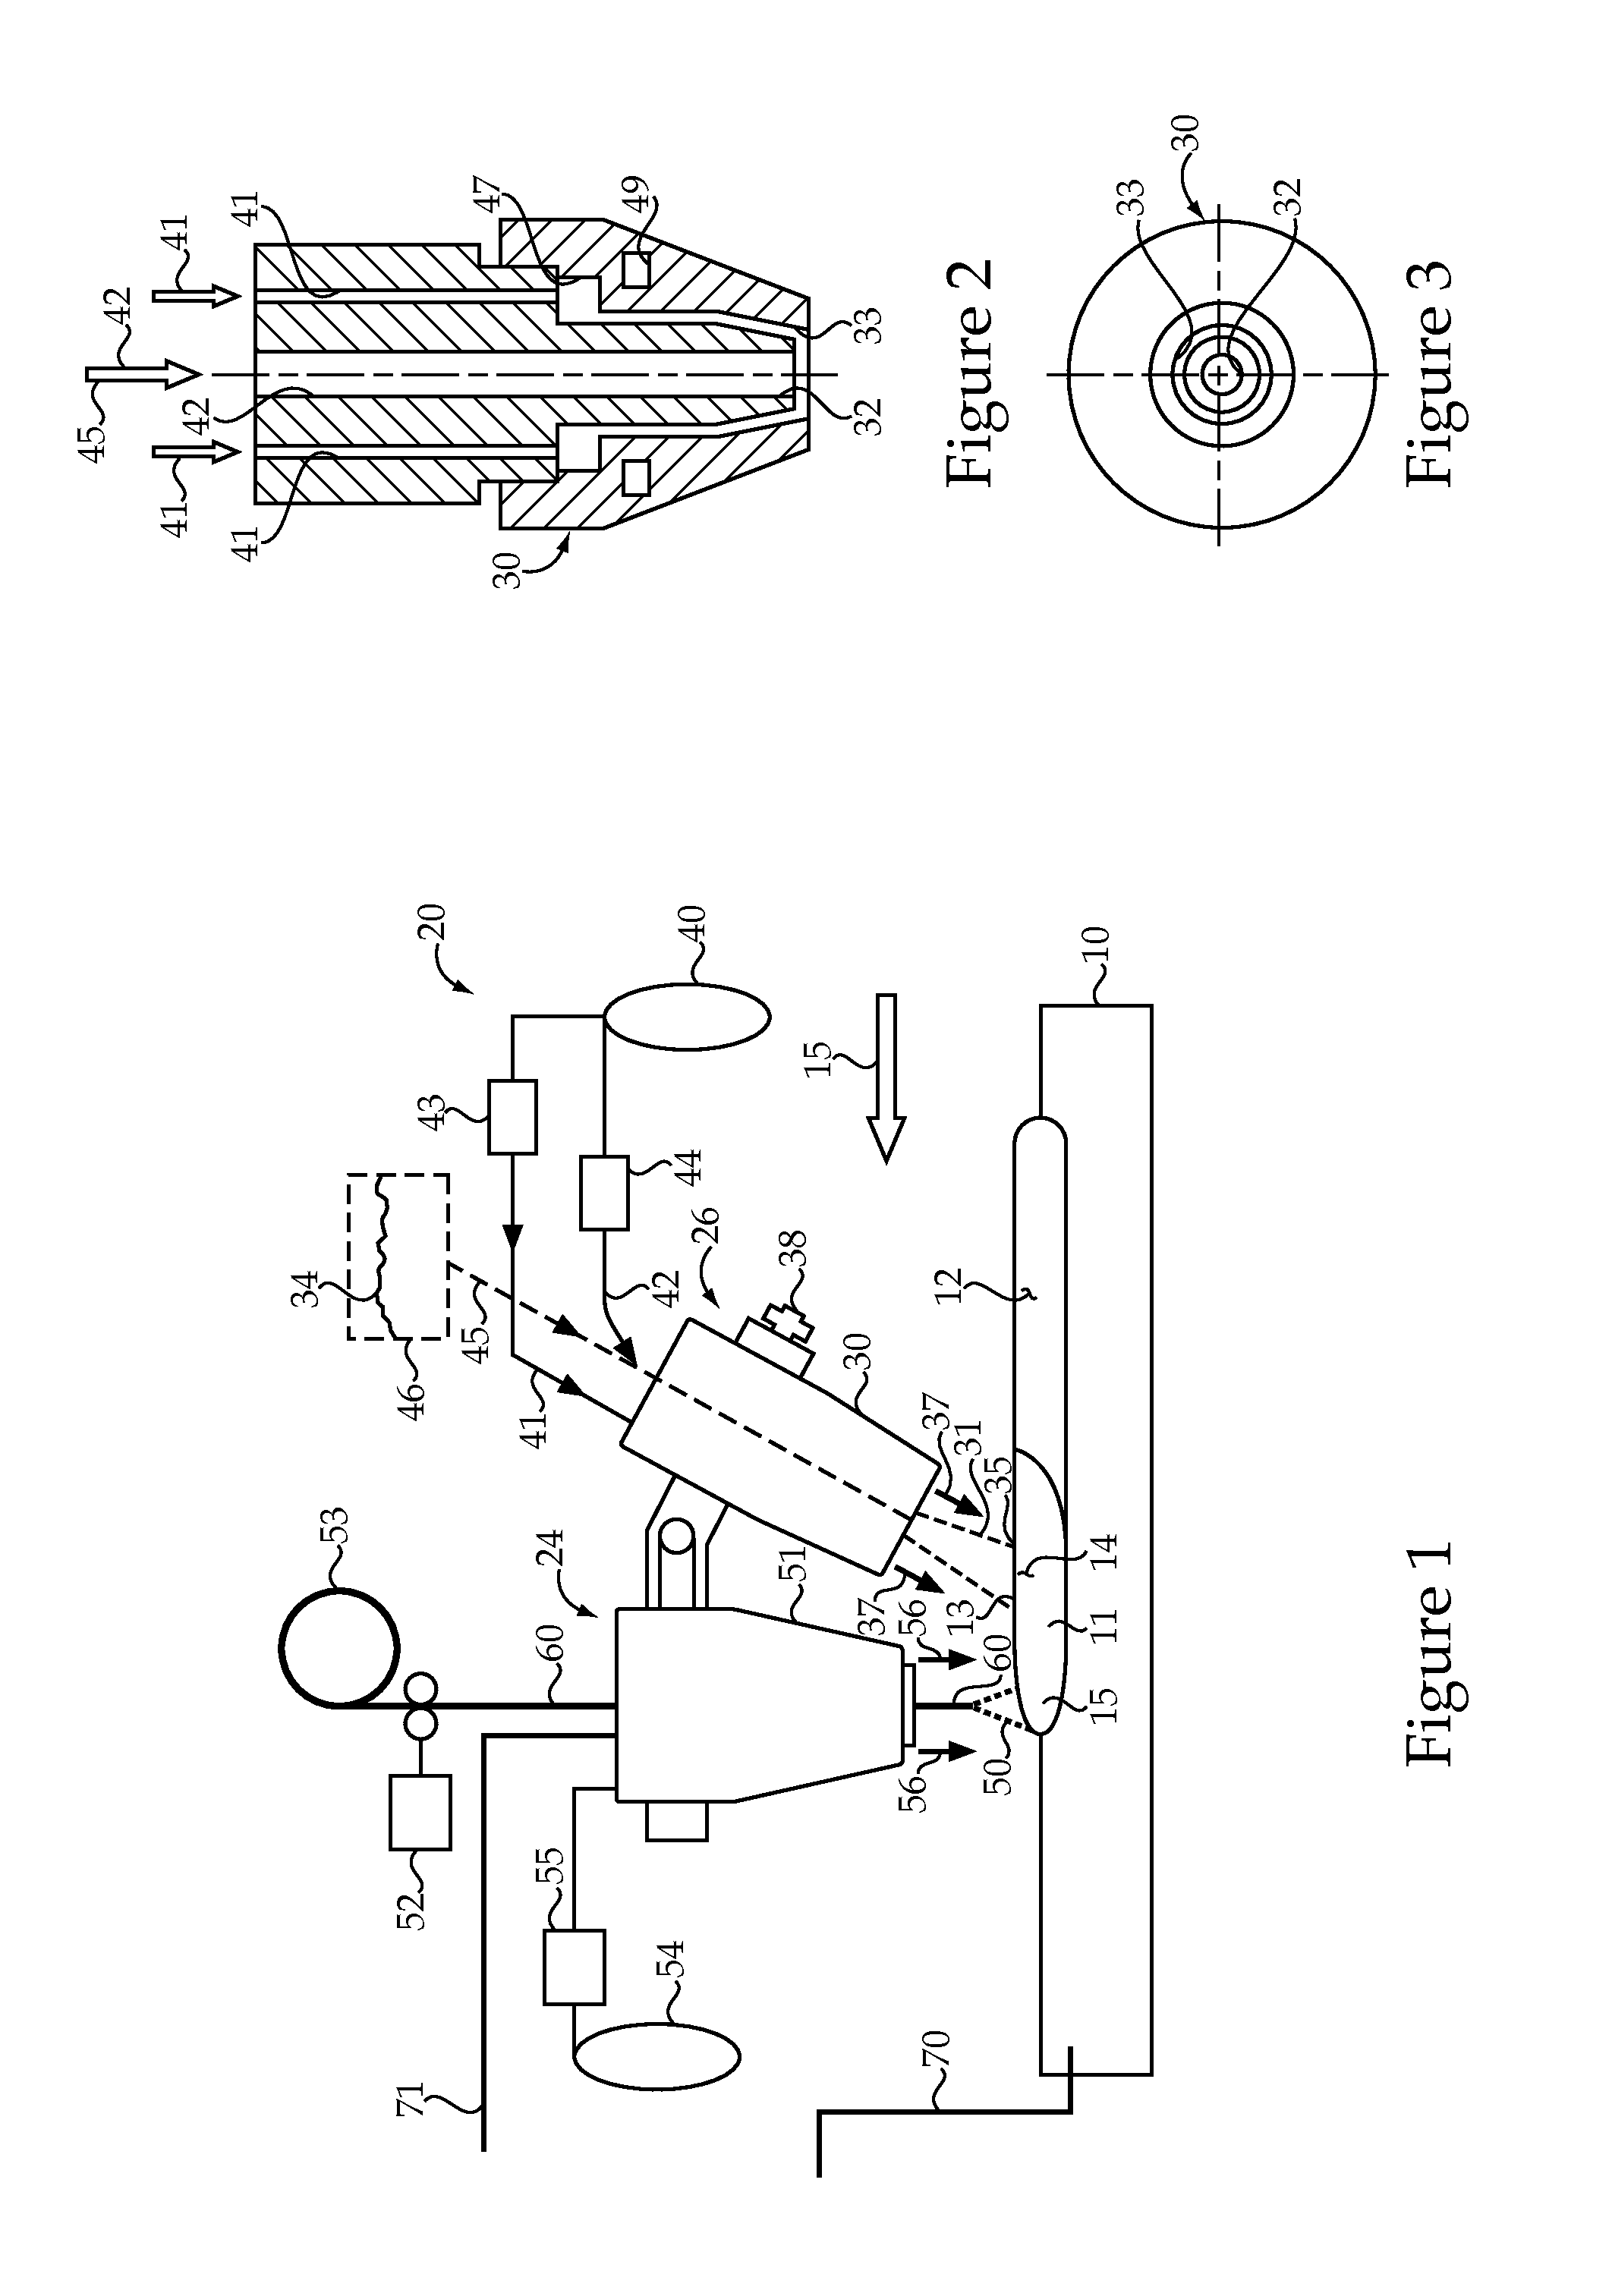 Alloy Depositing Machine And Method Of Depositing An Alloy Onto A Workpiece